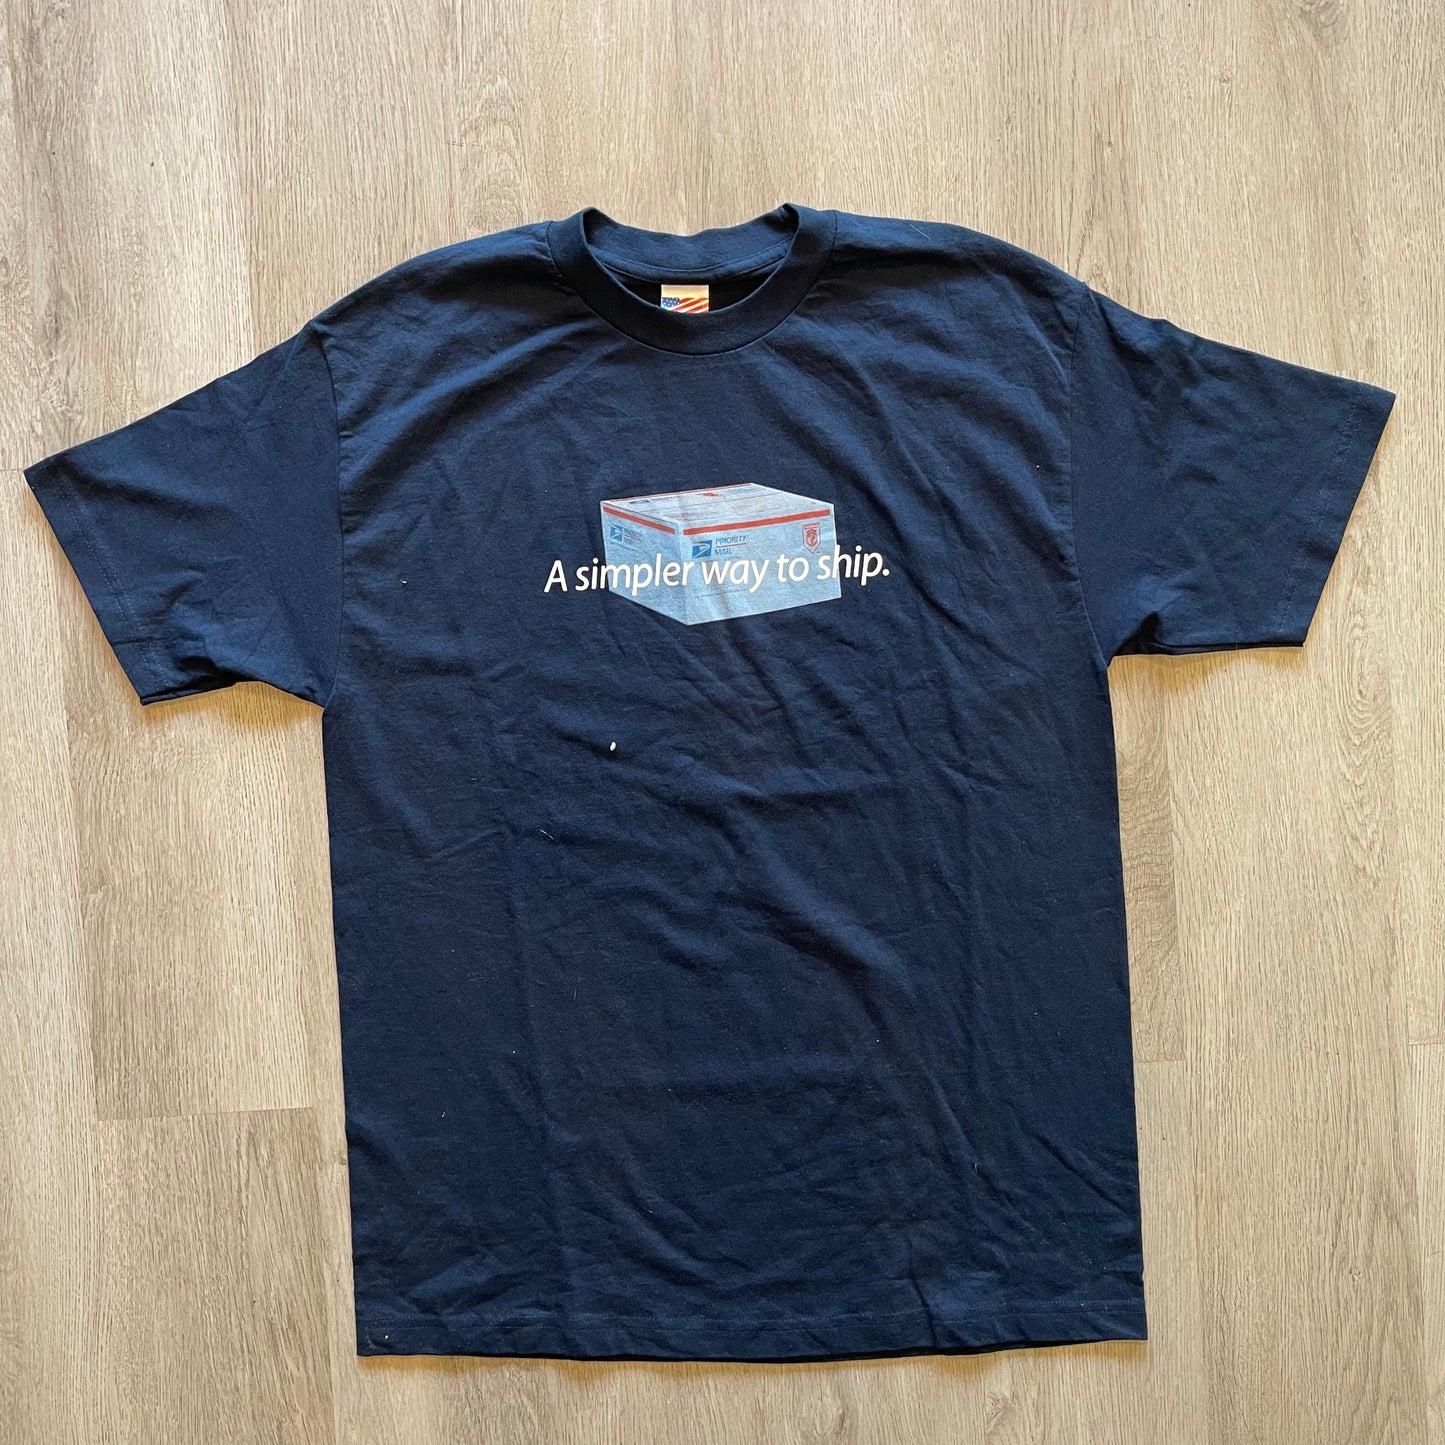 Vintage A Simpler Way To Ship T-shirt